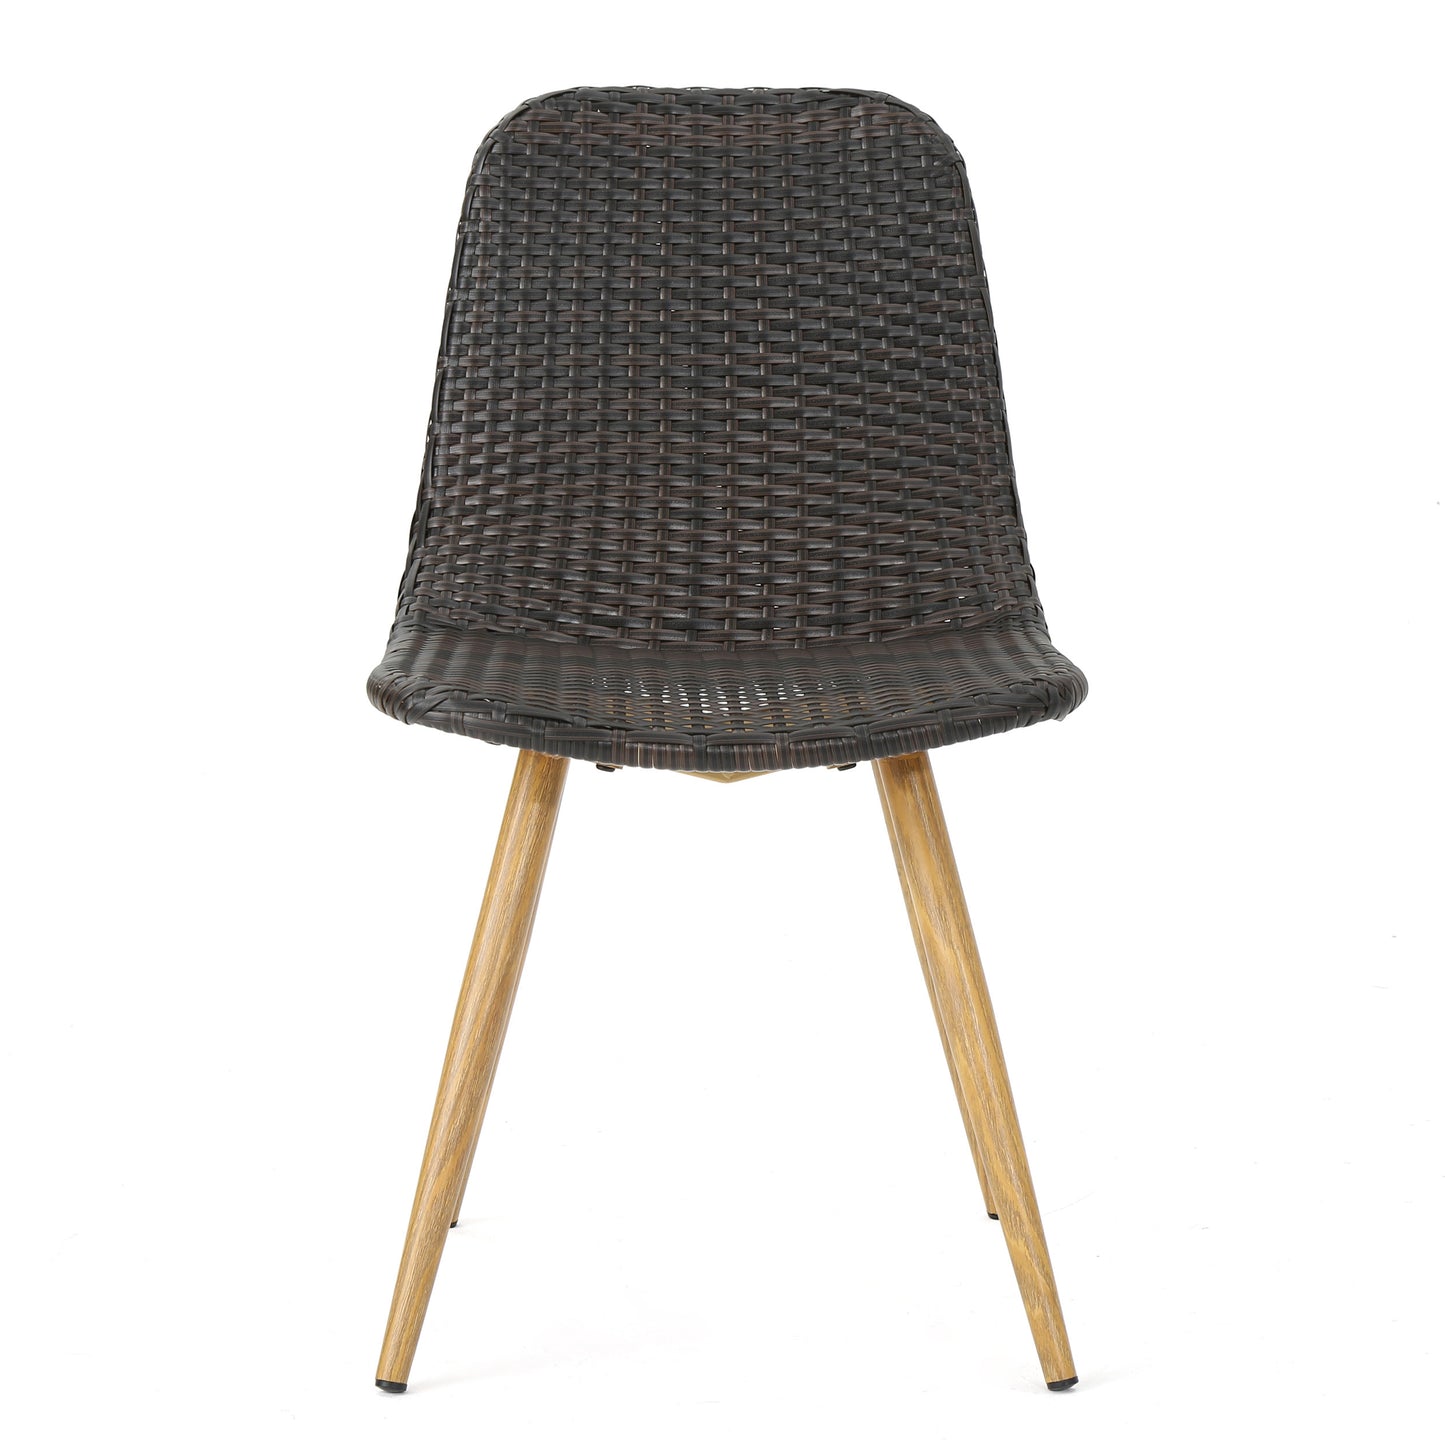 Gilda Outdoor Multi-Brown Wicker Dining Chairs With Wood Finished Metal Legs